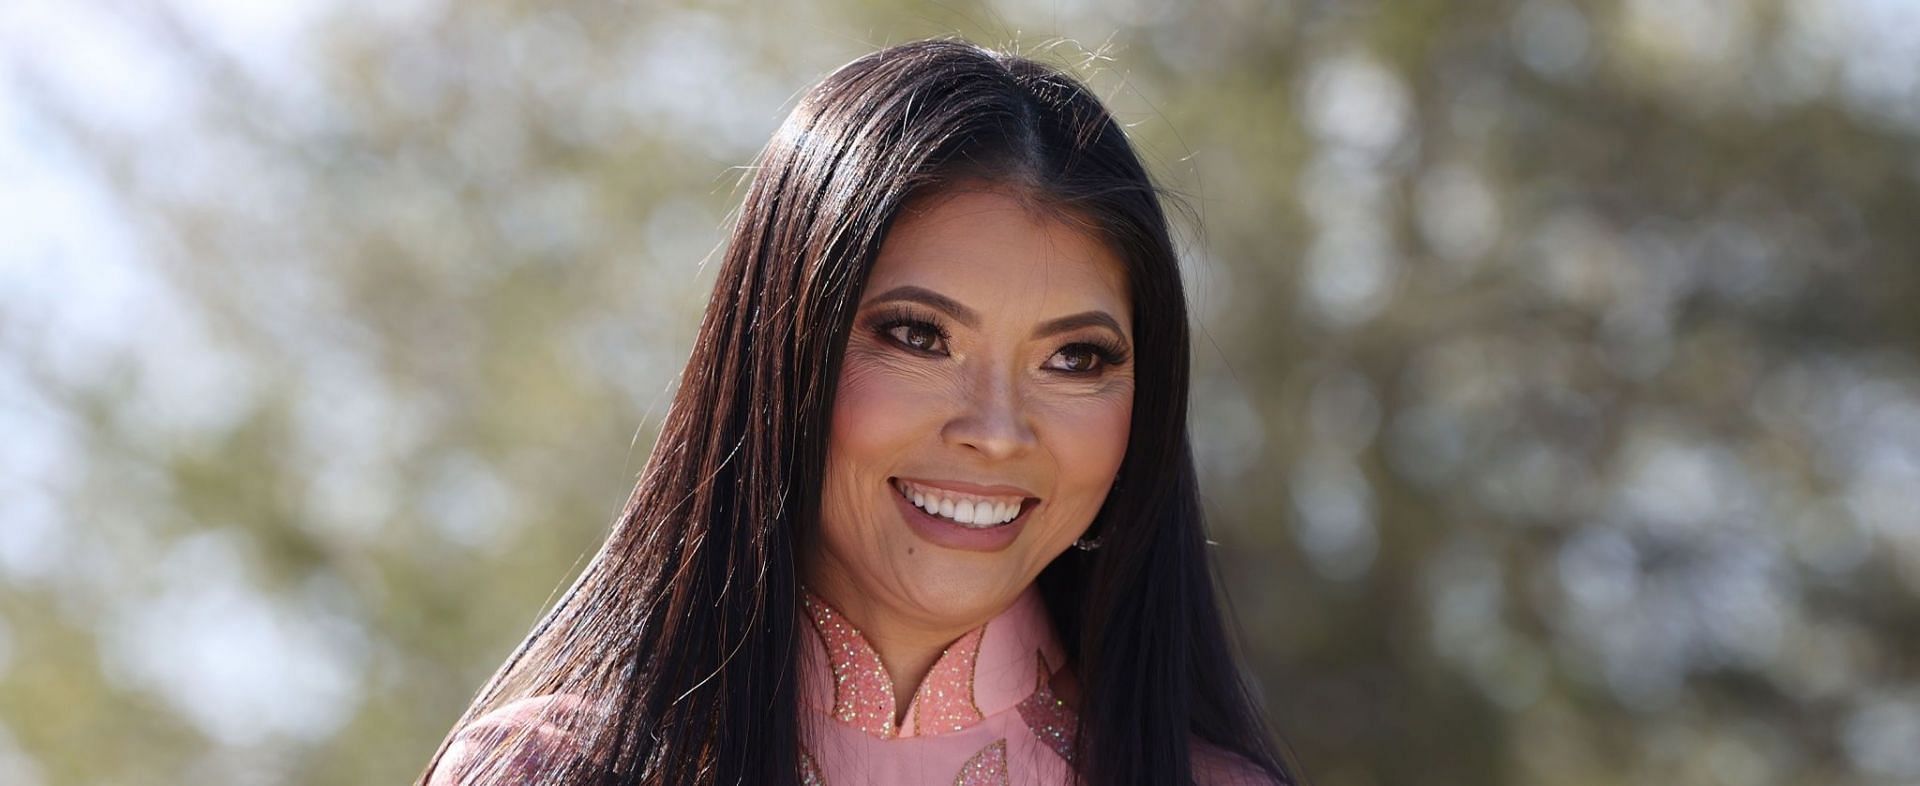 RHOSLC star Jennie Nguyen landed in hot waters after her controversial Facebook posts resurfaced online (Image via Natalie Cass/Getty Images)